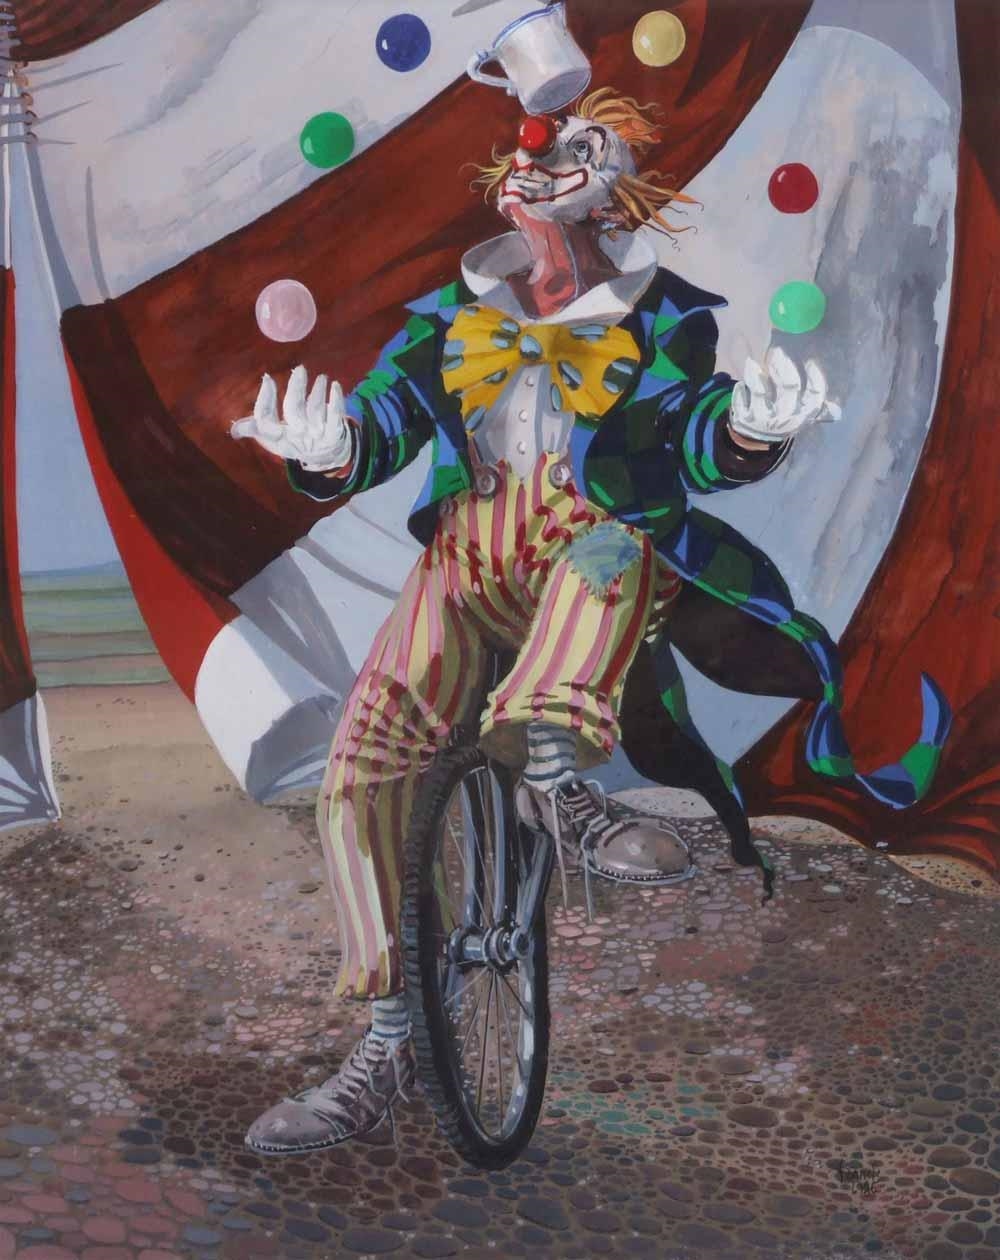 Artwork by Francis Wainwright, A juggling clown on a unicycle, Made of acrylic on board